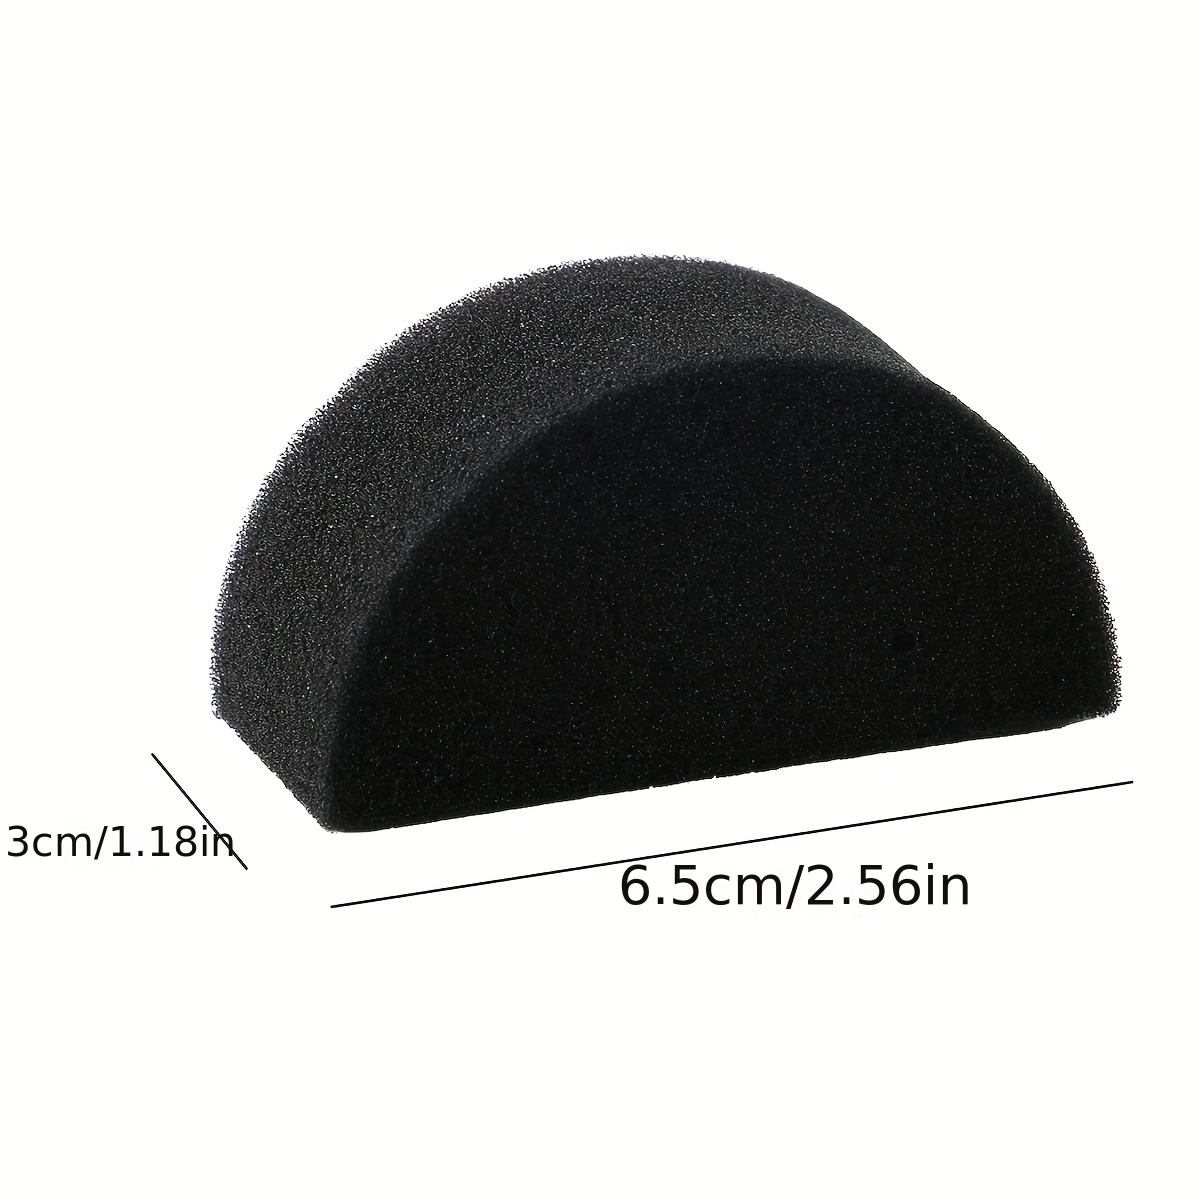 Face Painting Sponges Black Sponge Including Round Half Moon for Makeup  Crafts Art Work Sculpting Pottery Body Painting (60 Pcs)